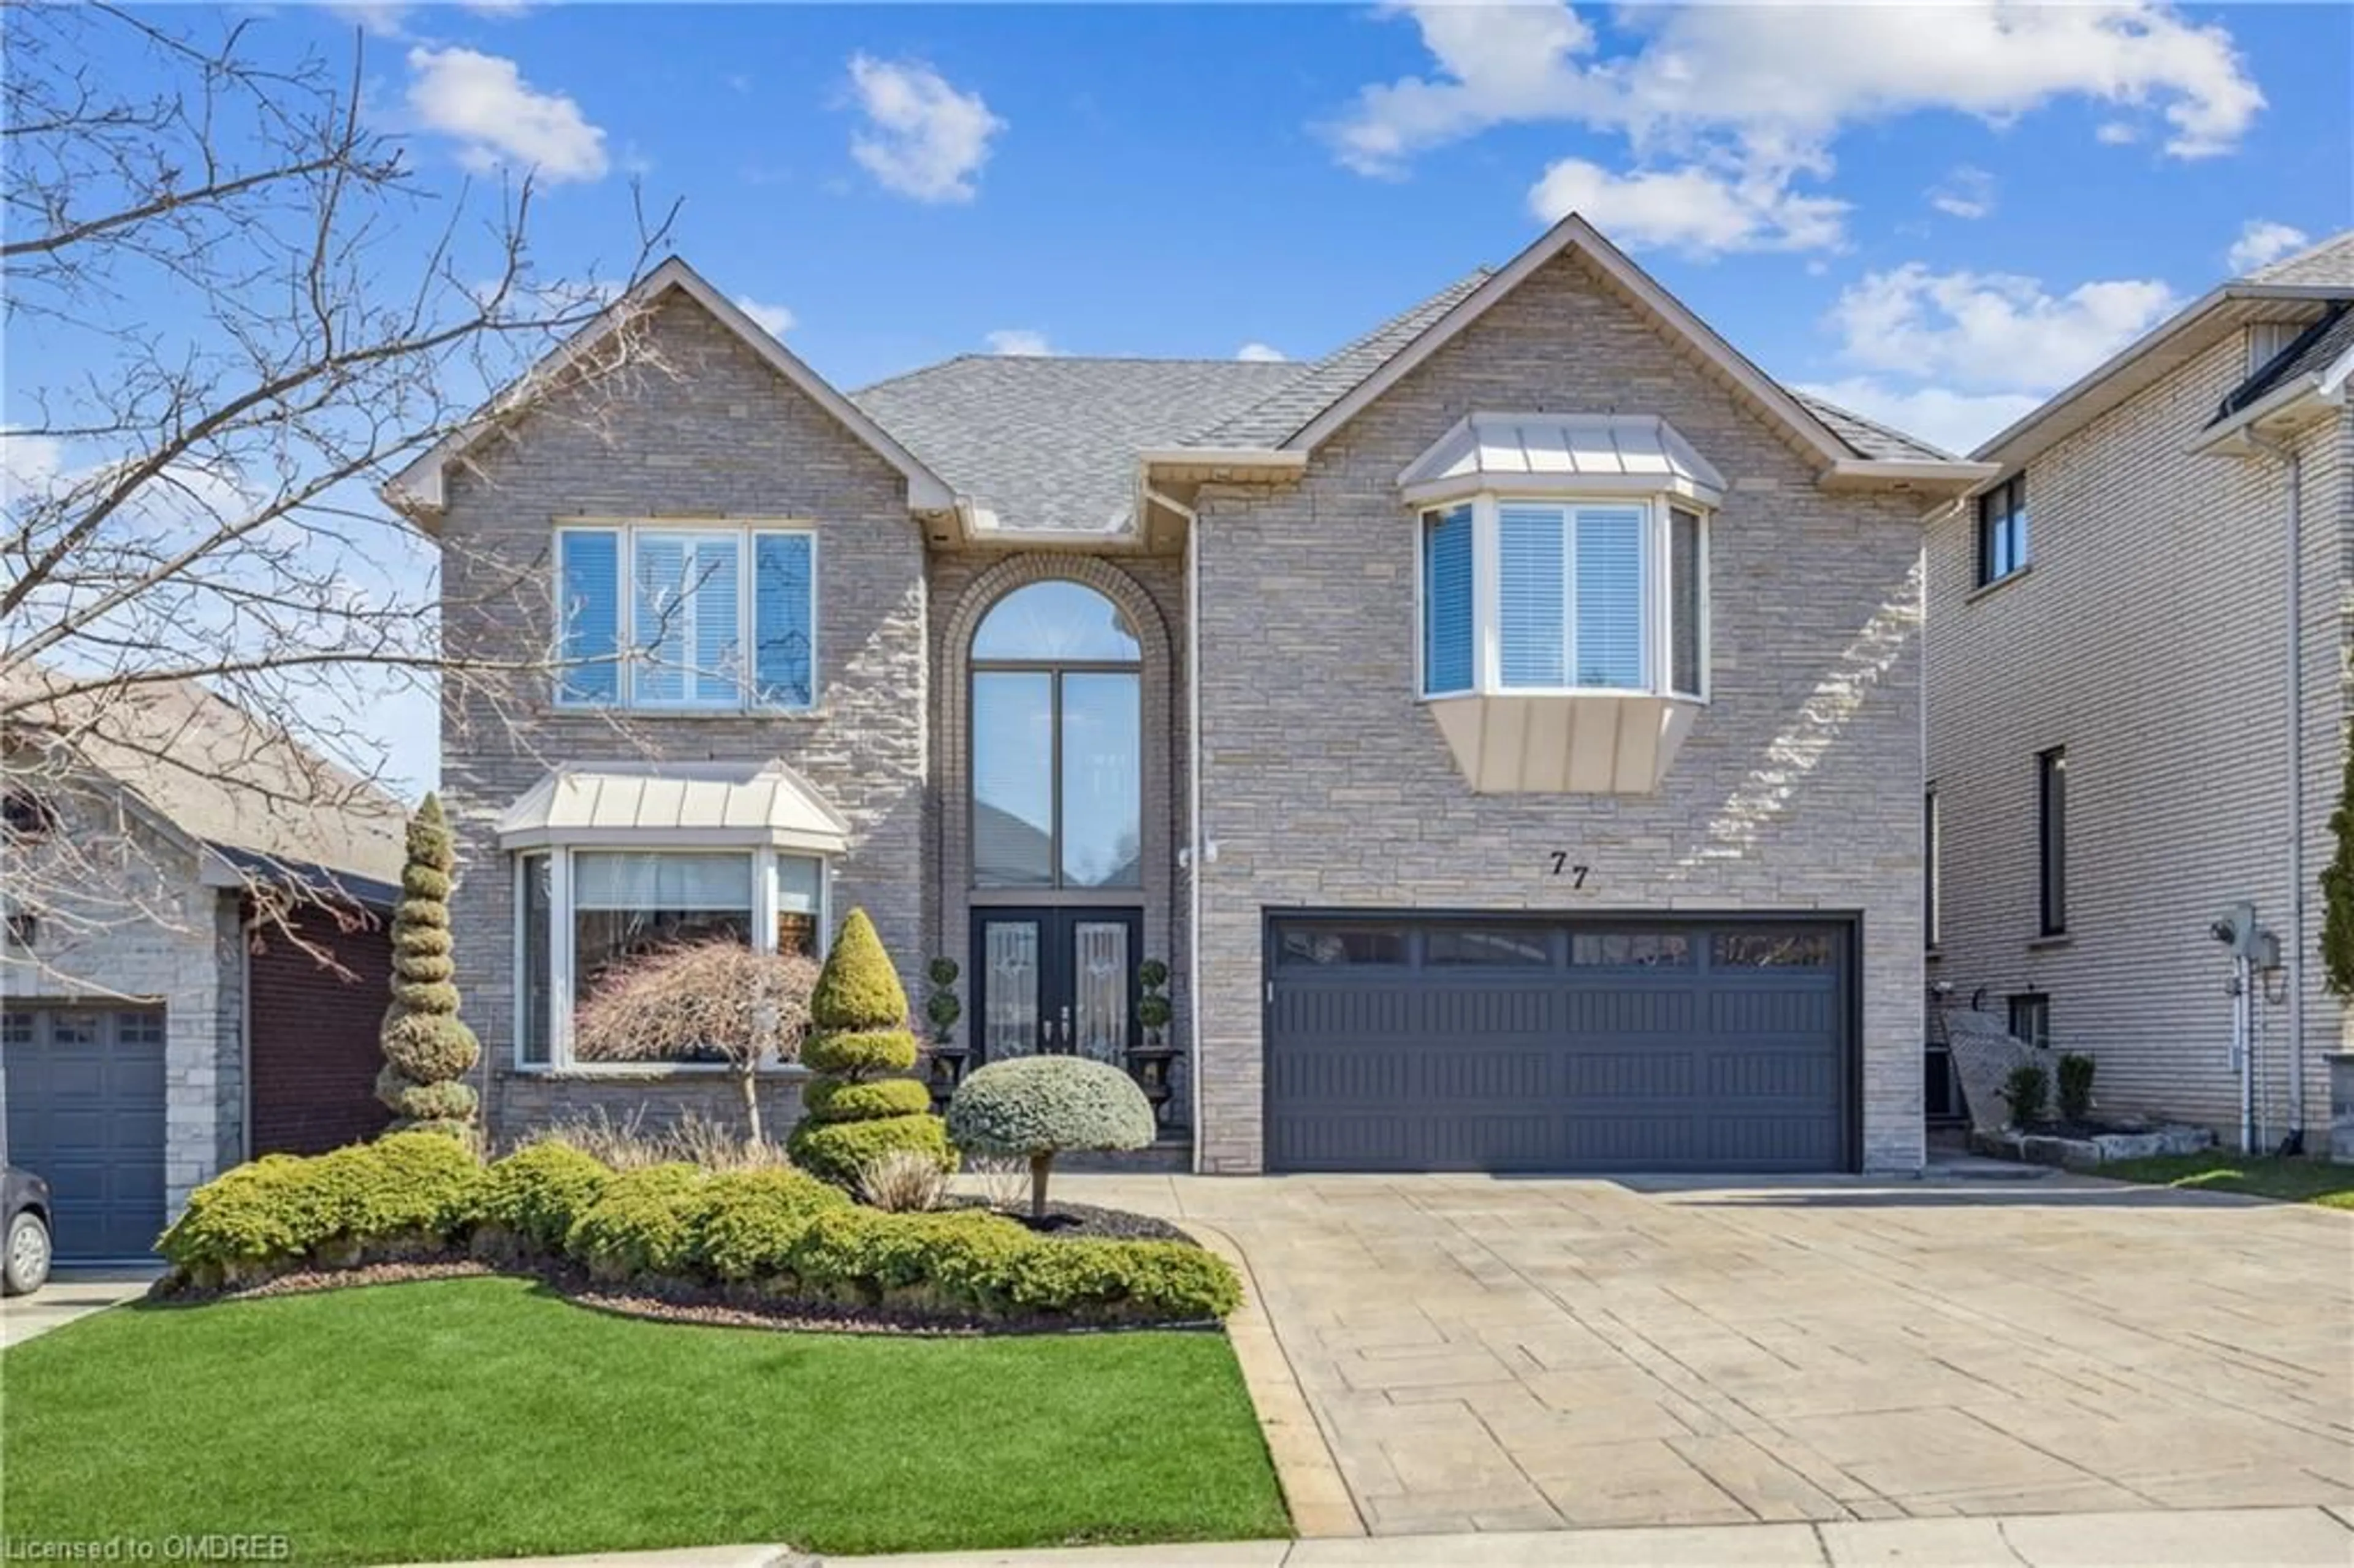 Home with brick exterior material for 77 Adriatic Blvd, Stoney Creek Ontario L8G 5C6